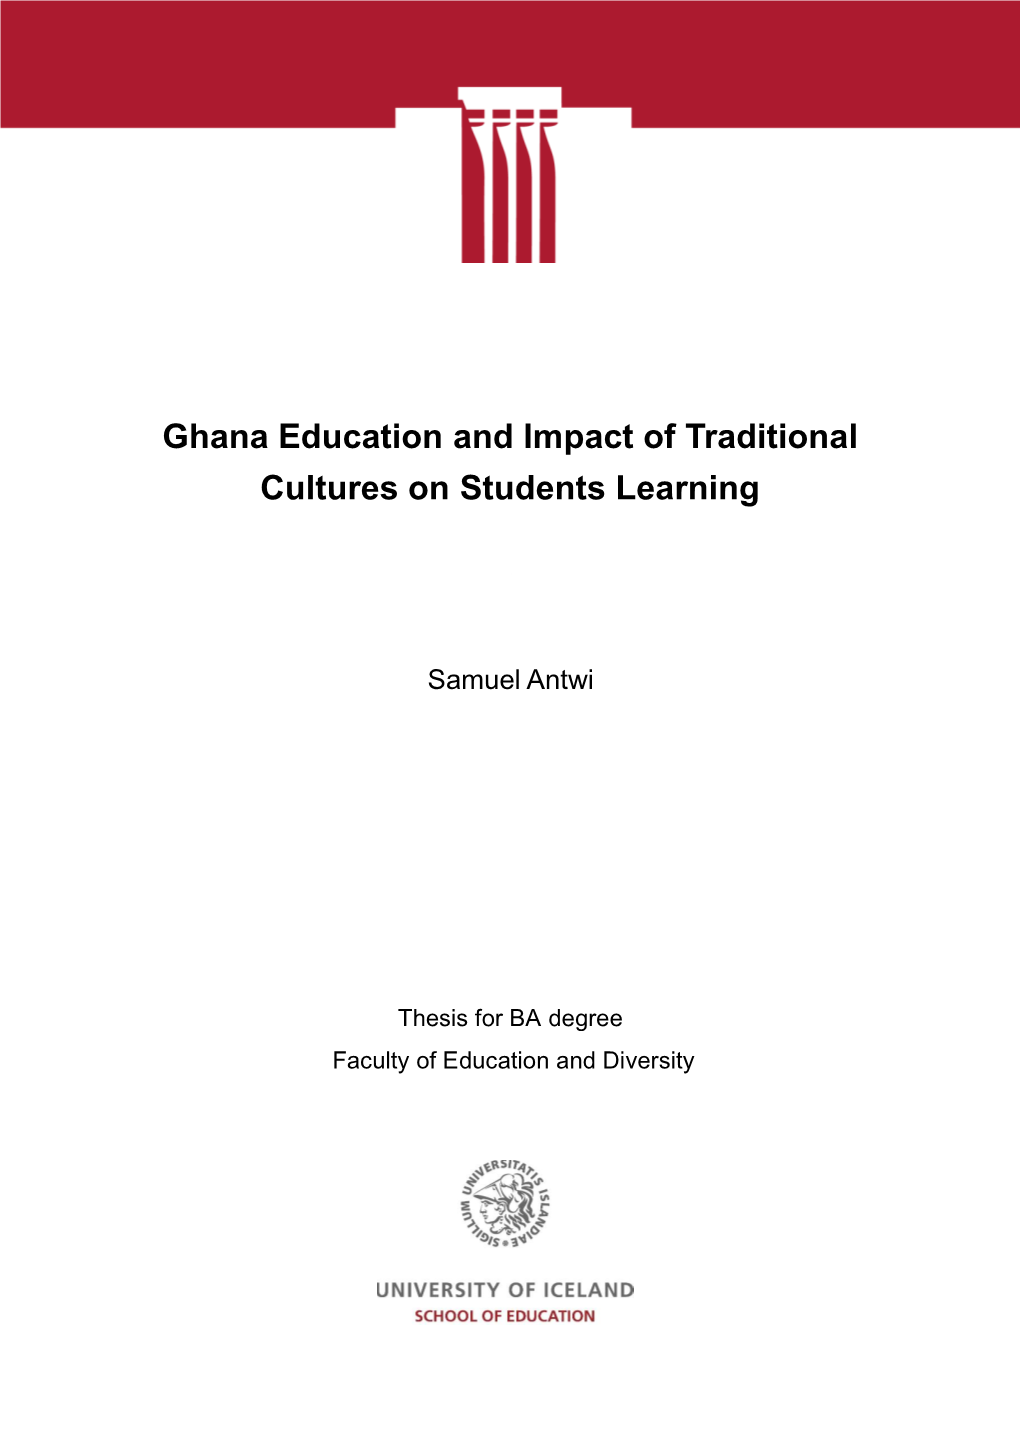 Ghana Education and Impact of Traditional Cultures on Students Learning